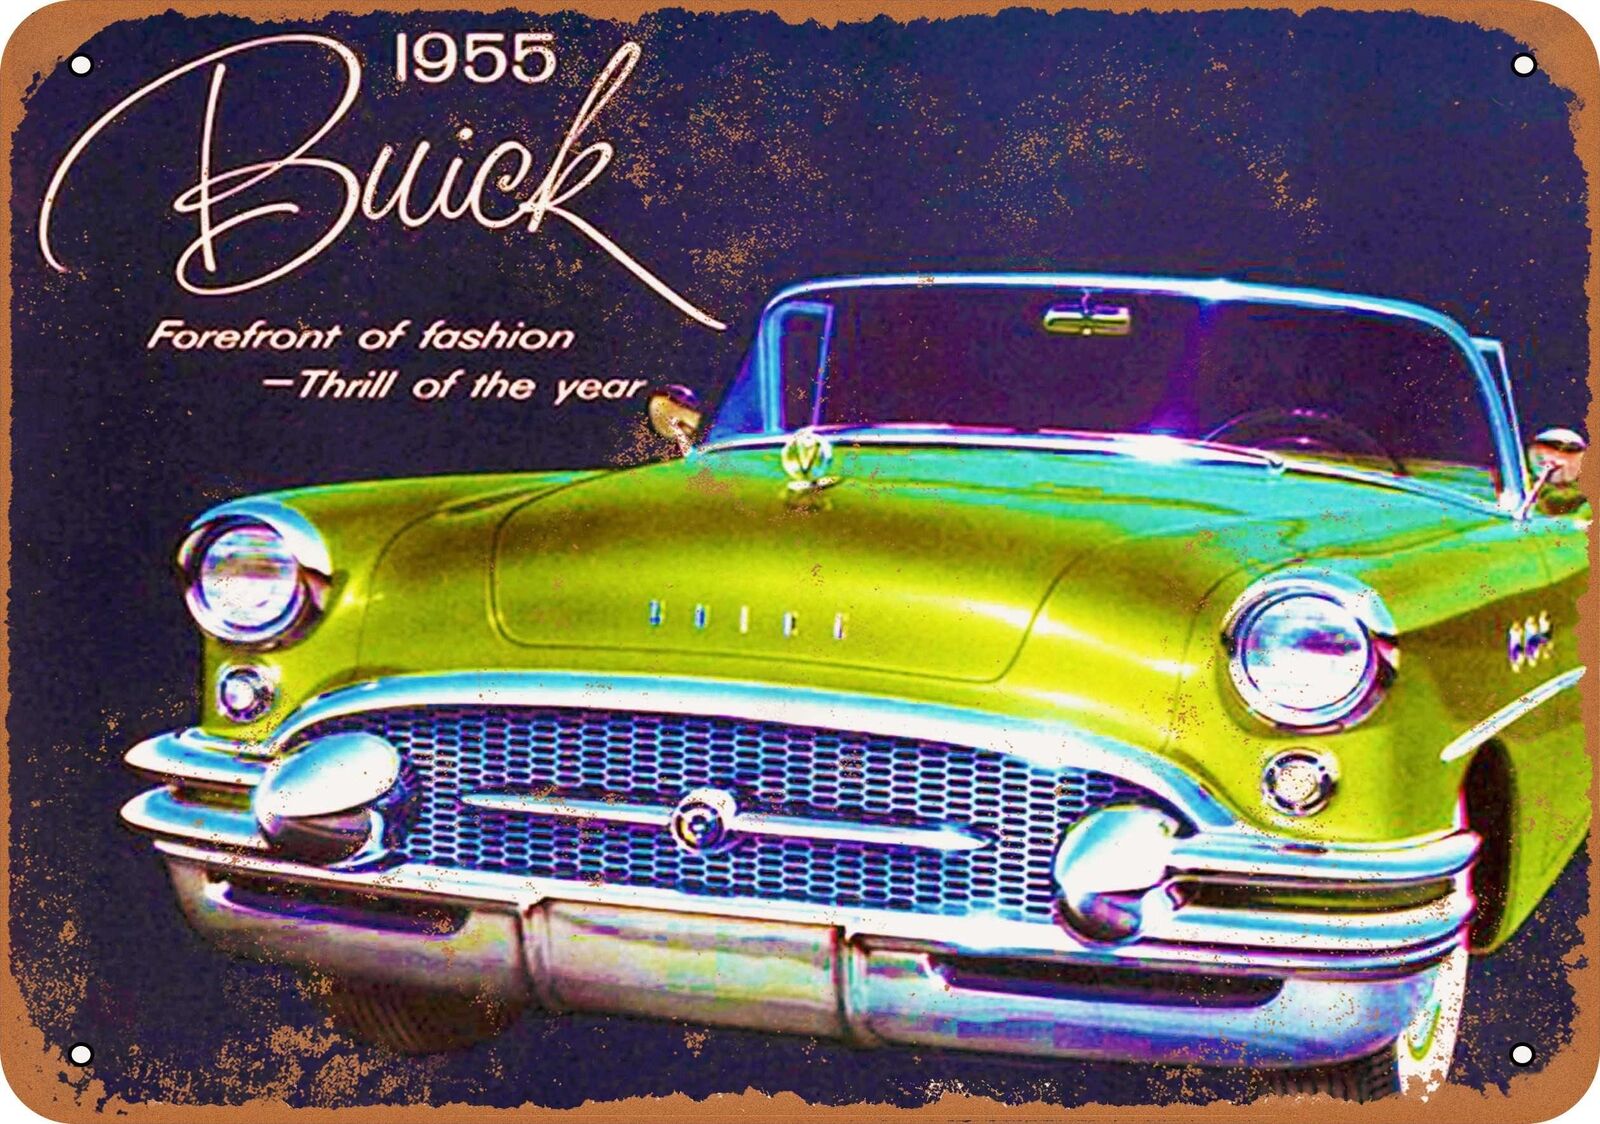 Metal Sign - 1955 Buick - Vintage Look Reproduction